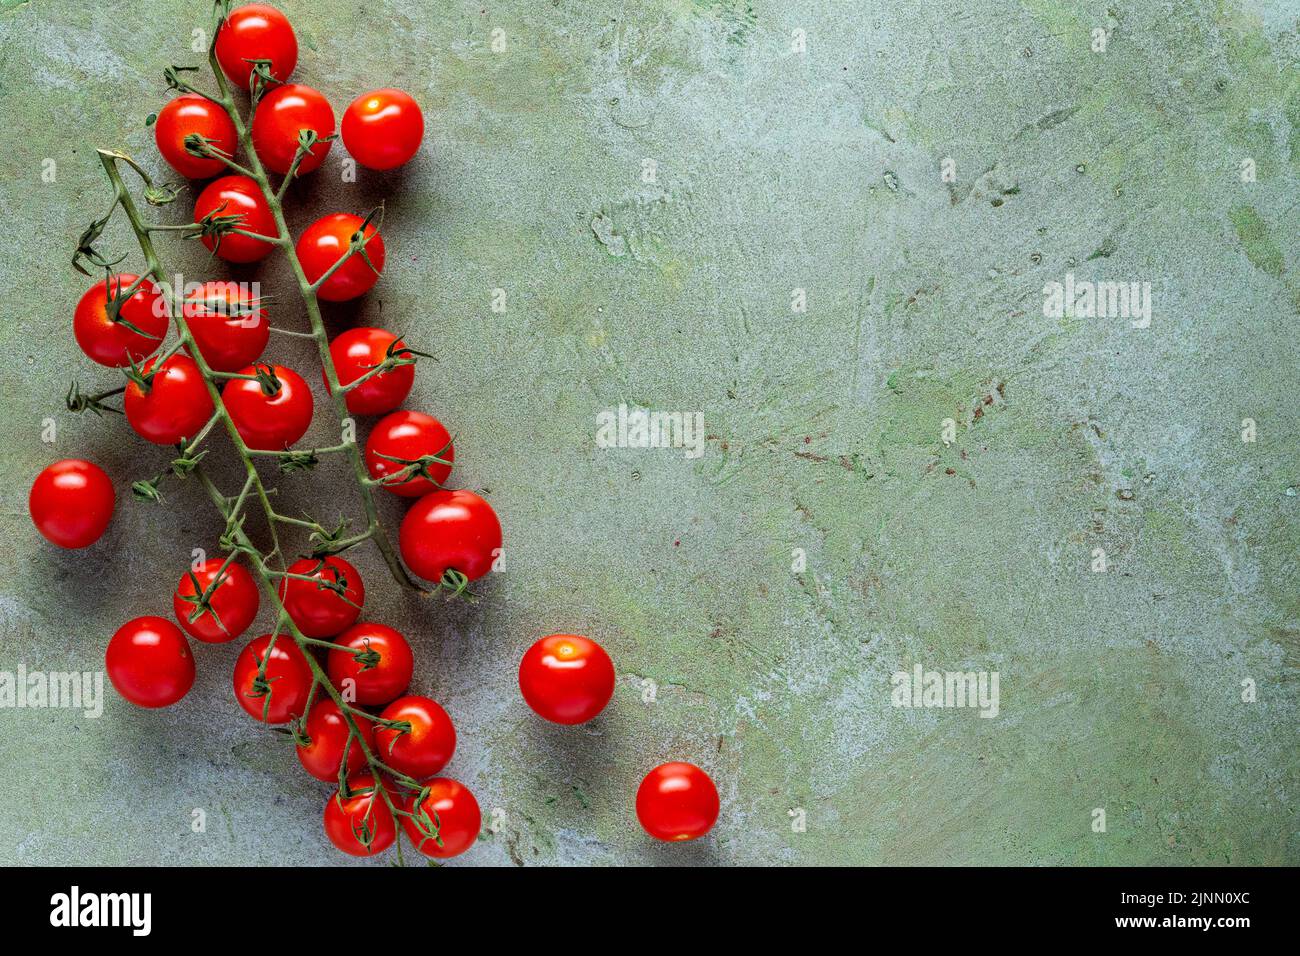 fresh cherry tomatoes on the vine on a textured green background Stock Photo